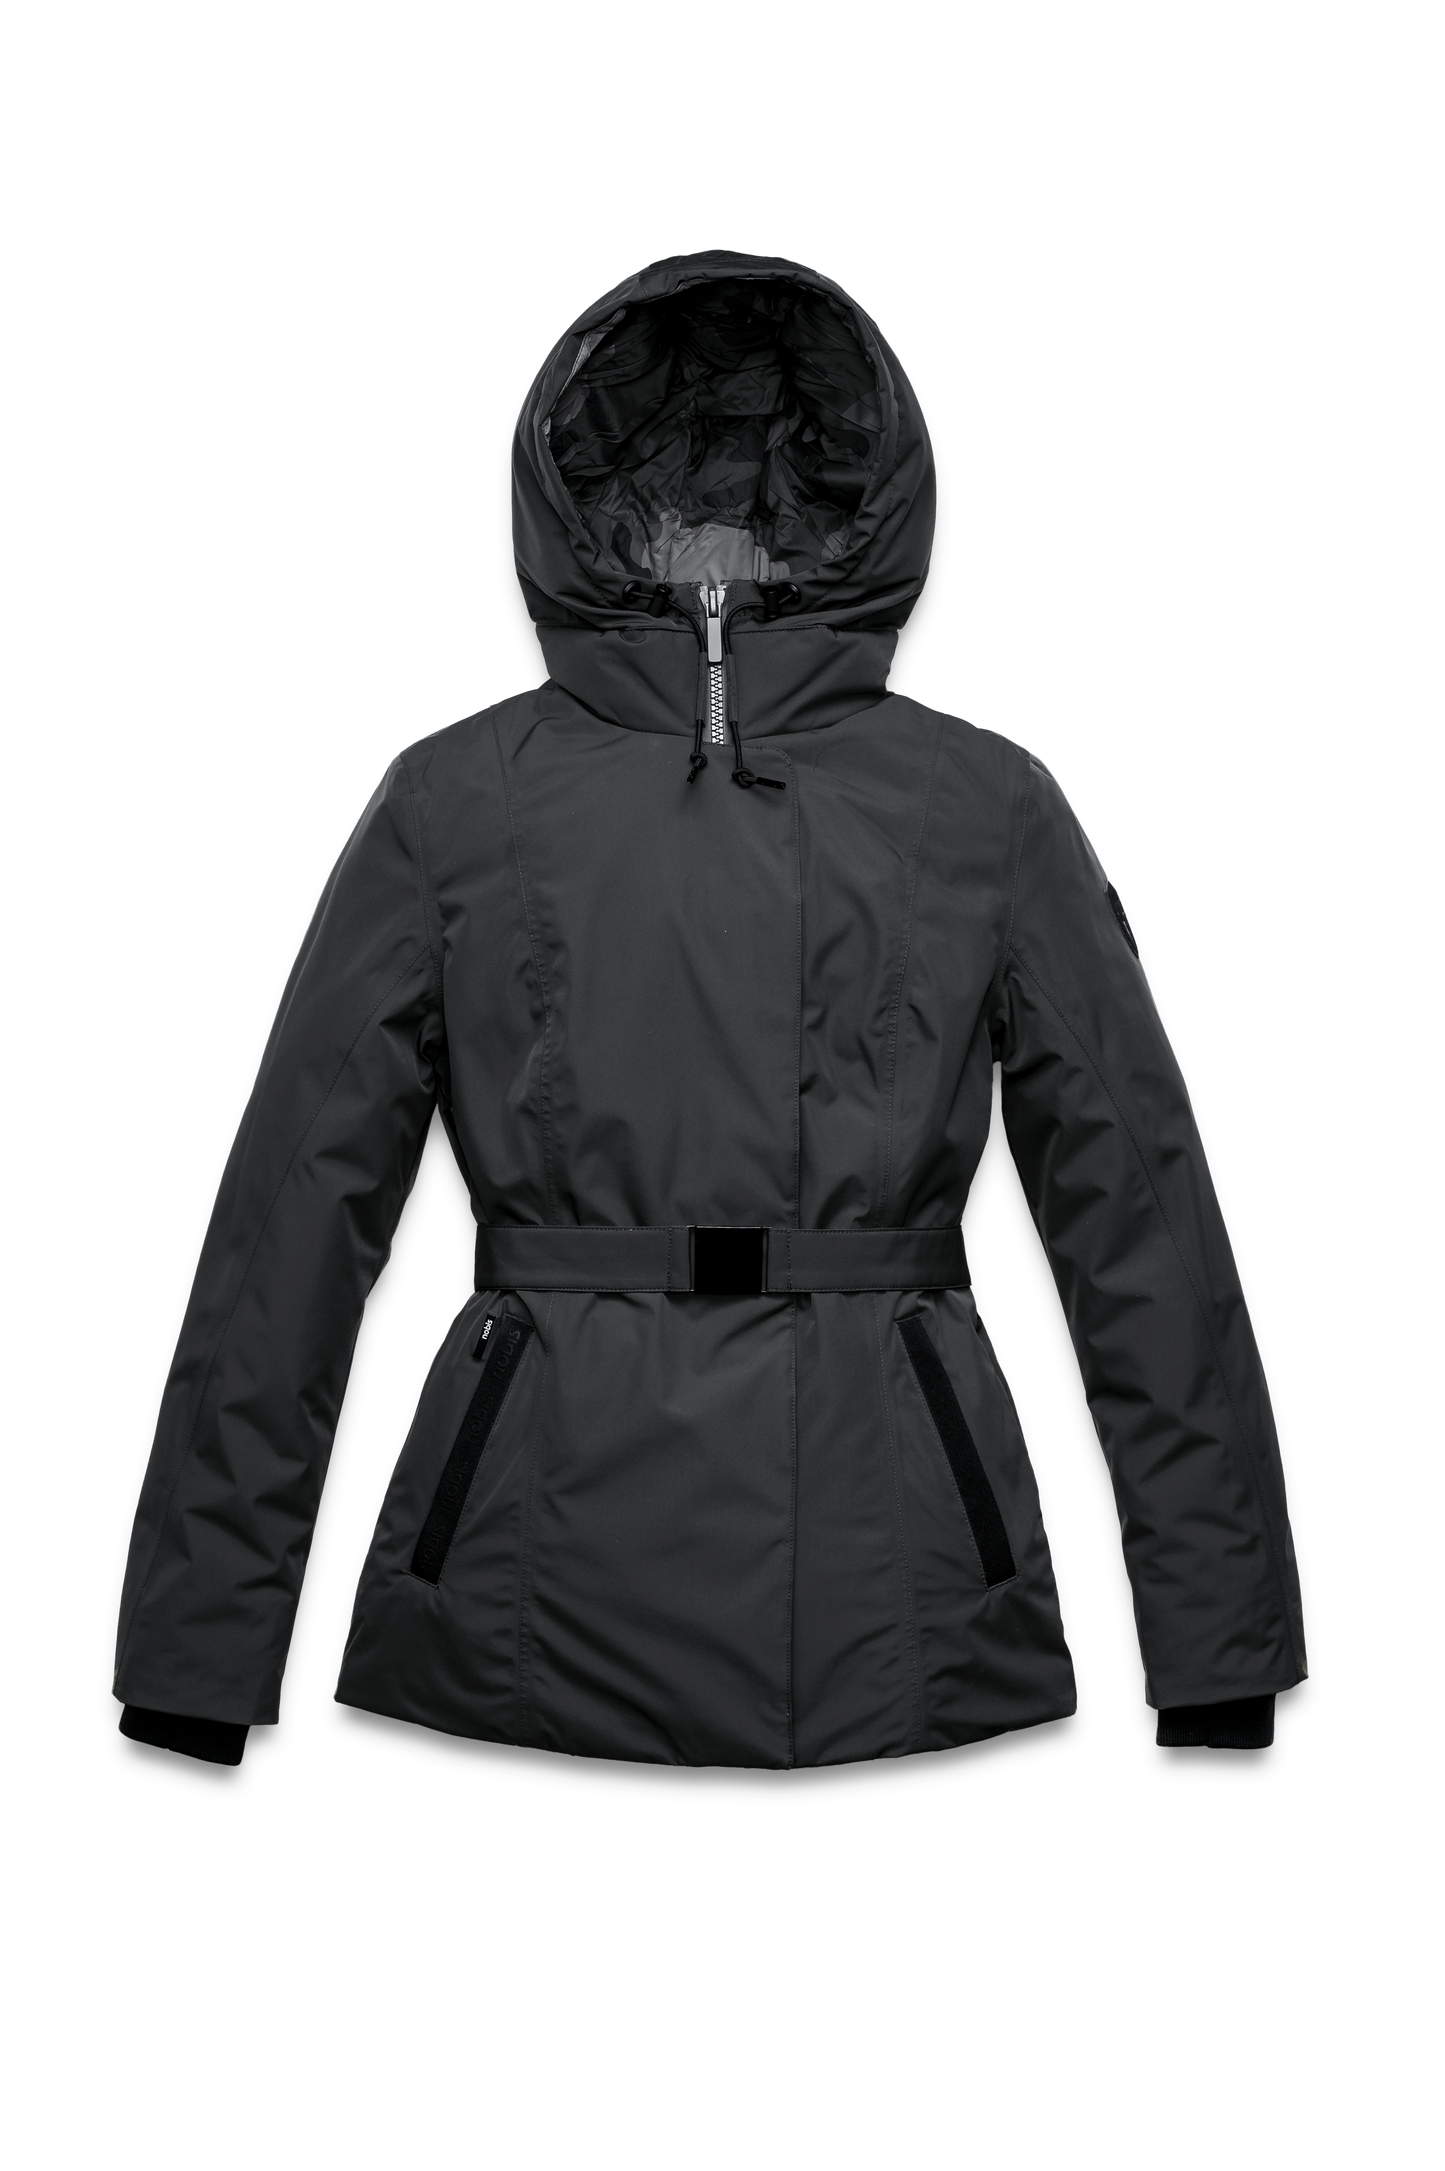 Ladies hip length down-filled parka with non-removable hood and adjustable belt in Black